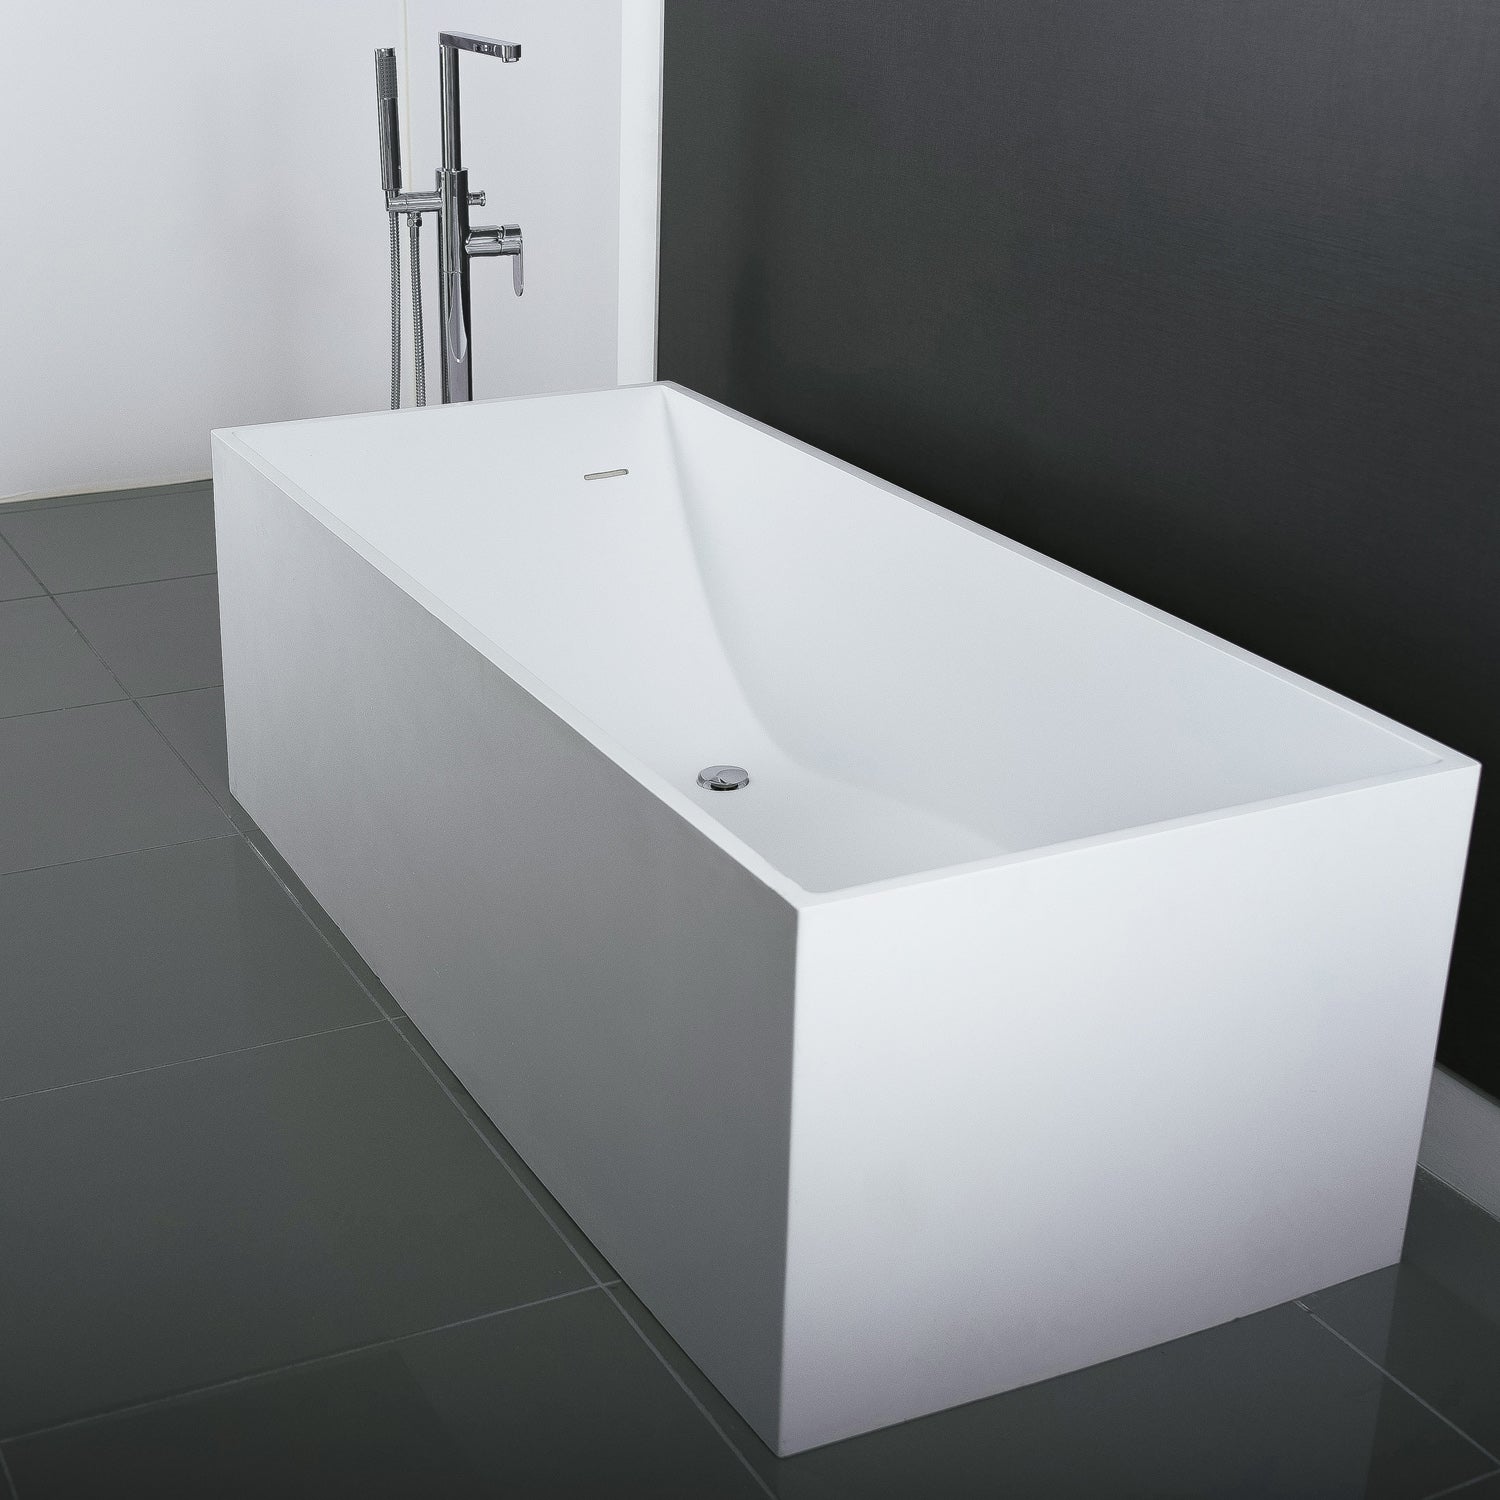 DAX Square Freestanding Solid Surface Bathtub with Central Drain and Overflow, Stainless Steel Frame, 66-1/18 x 21-5/8 x 29-5/8 Inches (BT-AB-B029)